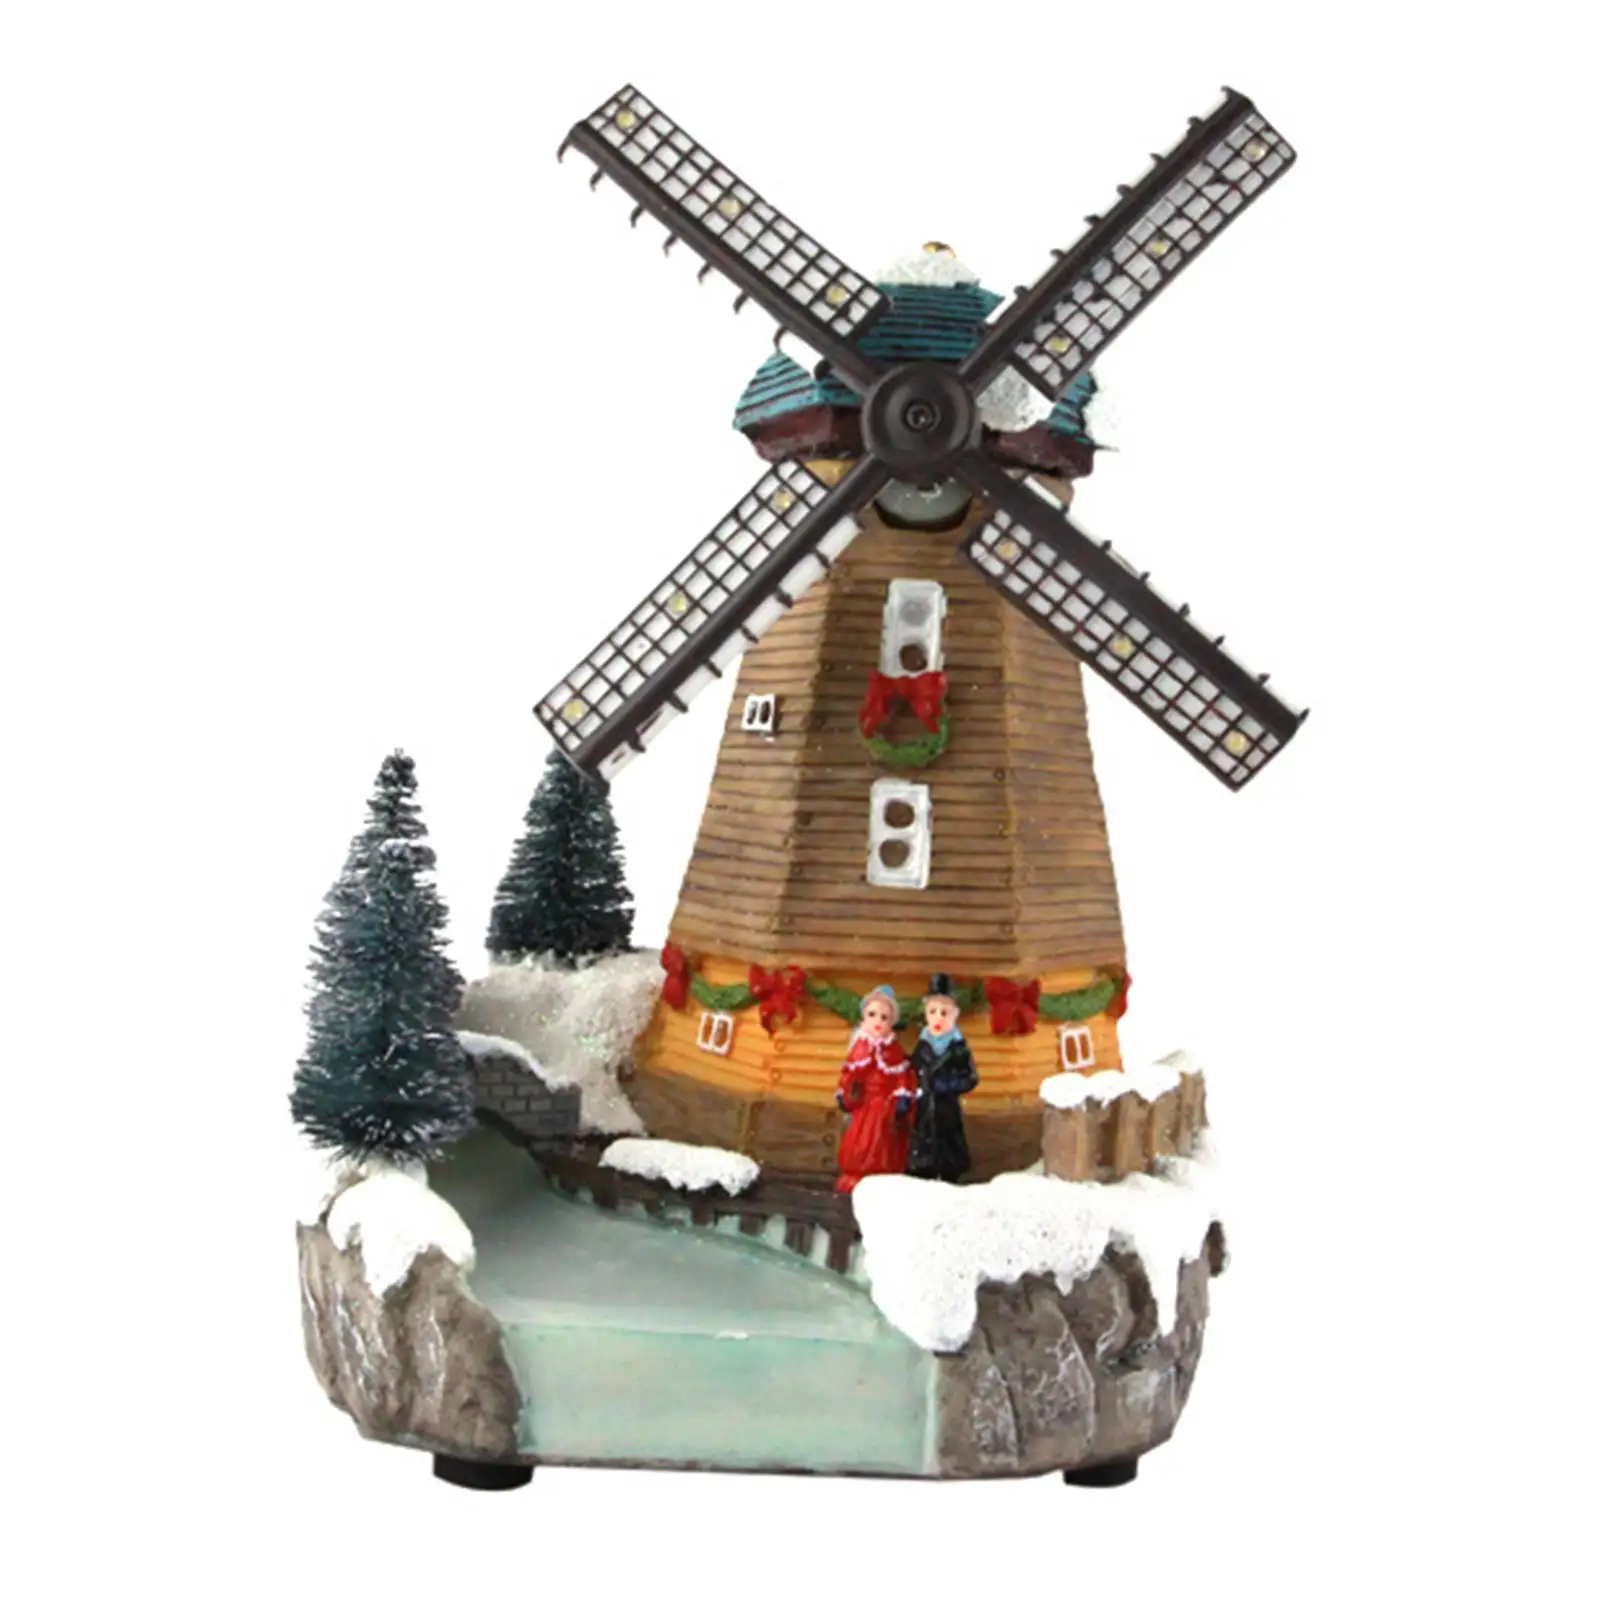 LED Lighted Christmas Village Windmill Crafts Resin Musical Box Building Sculpture for Office Living Room Desk Bedroom Fireplace